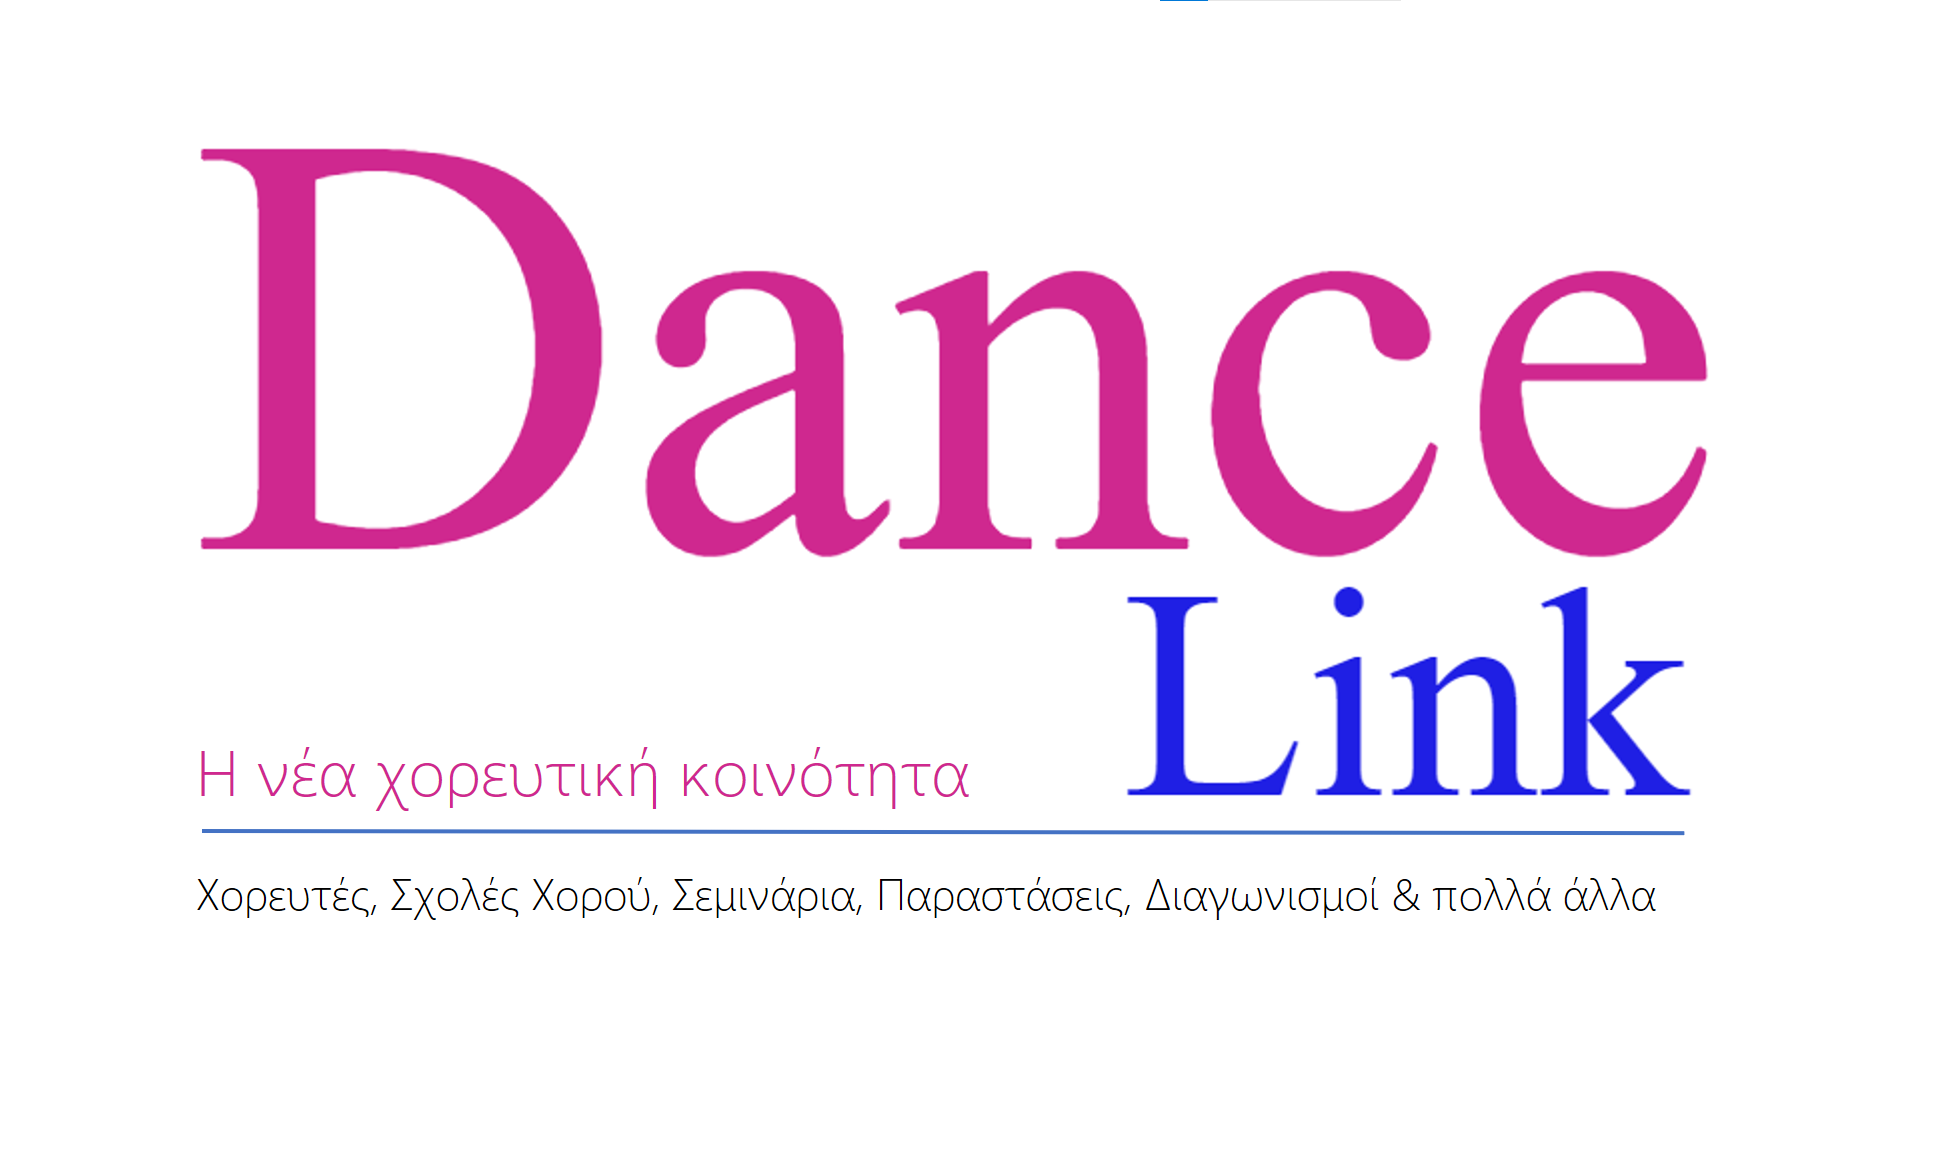 the word dance in different fonts